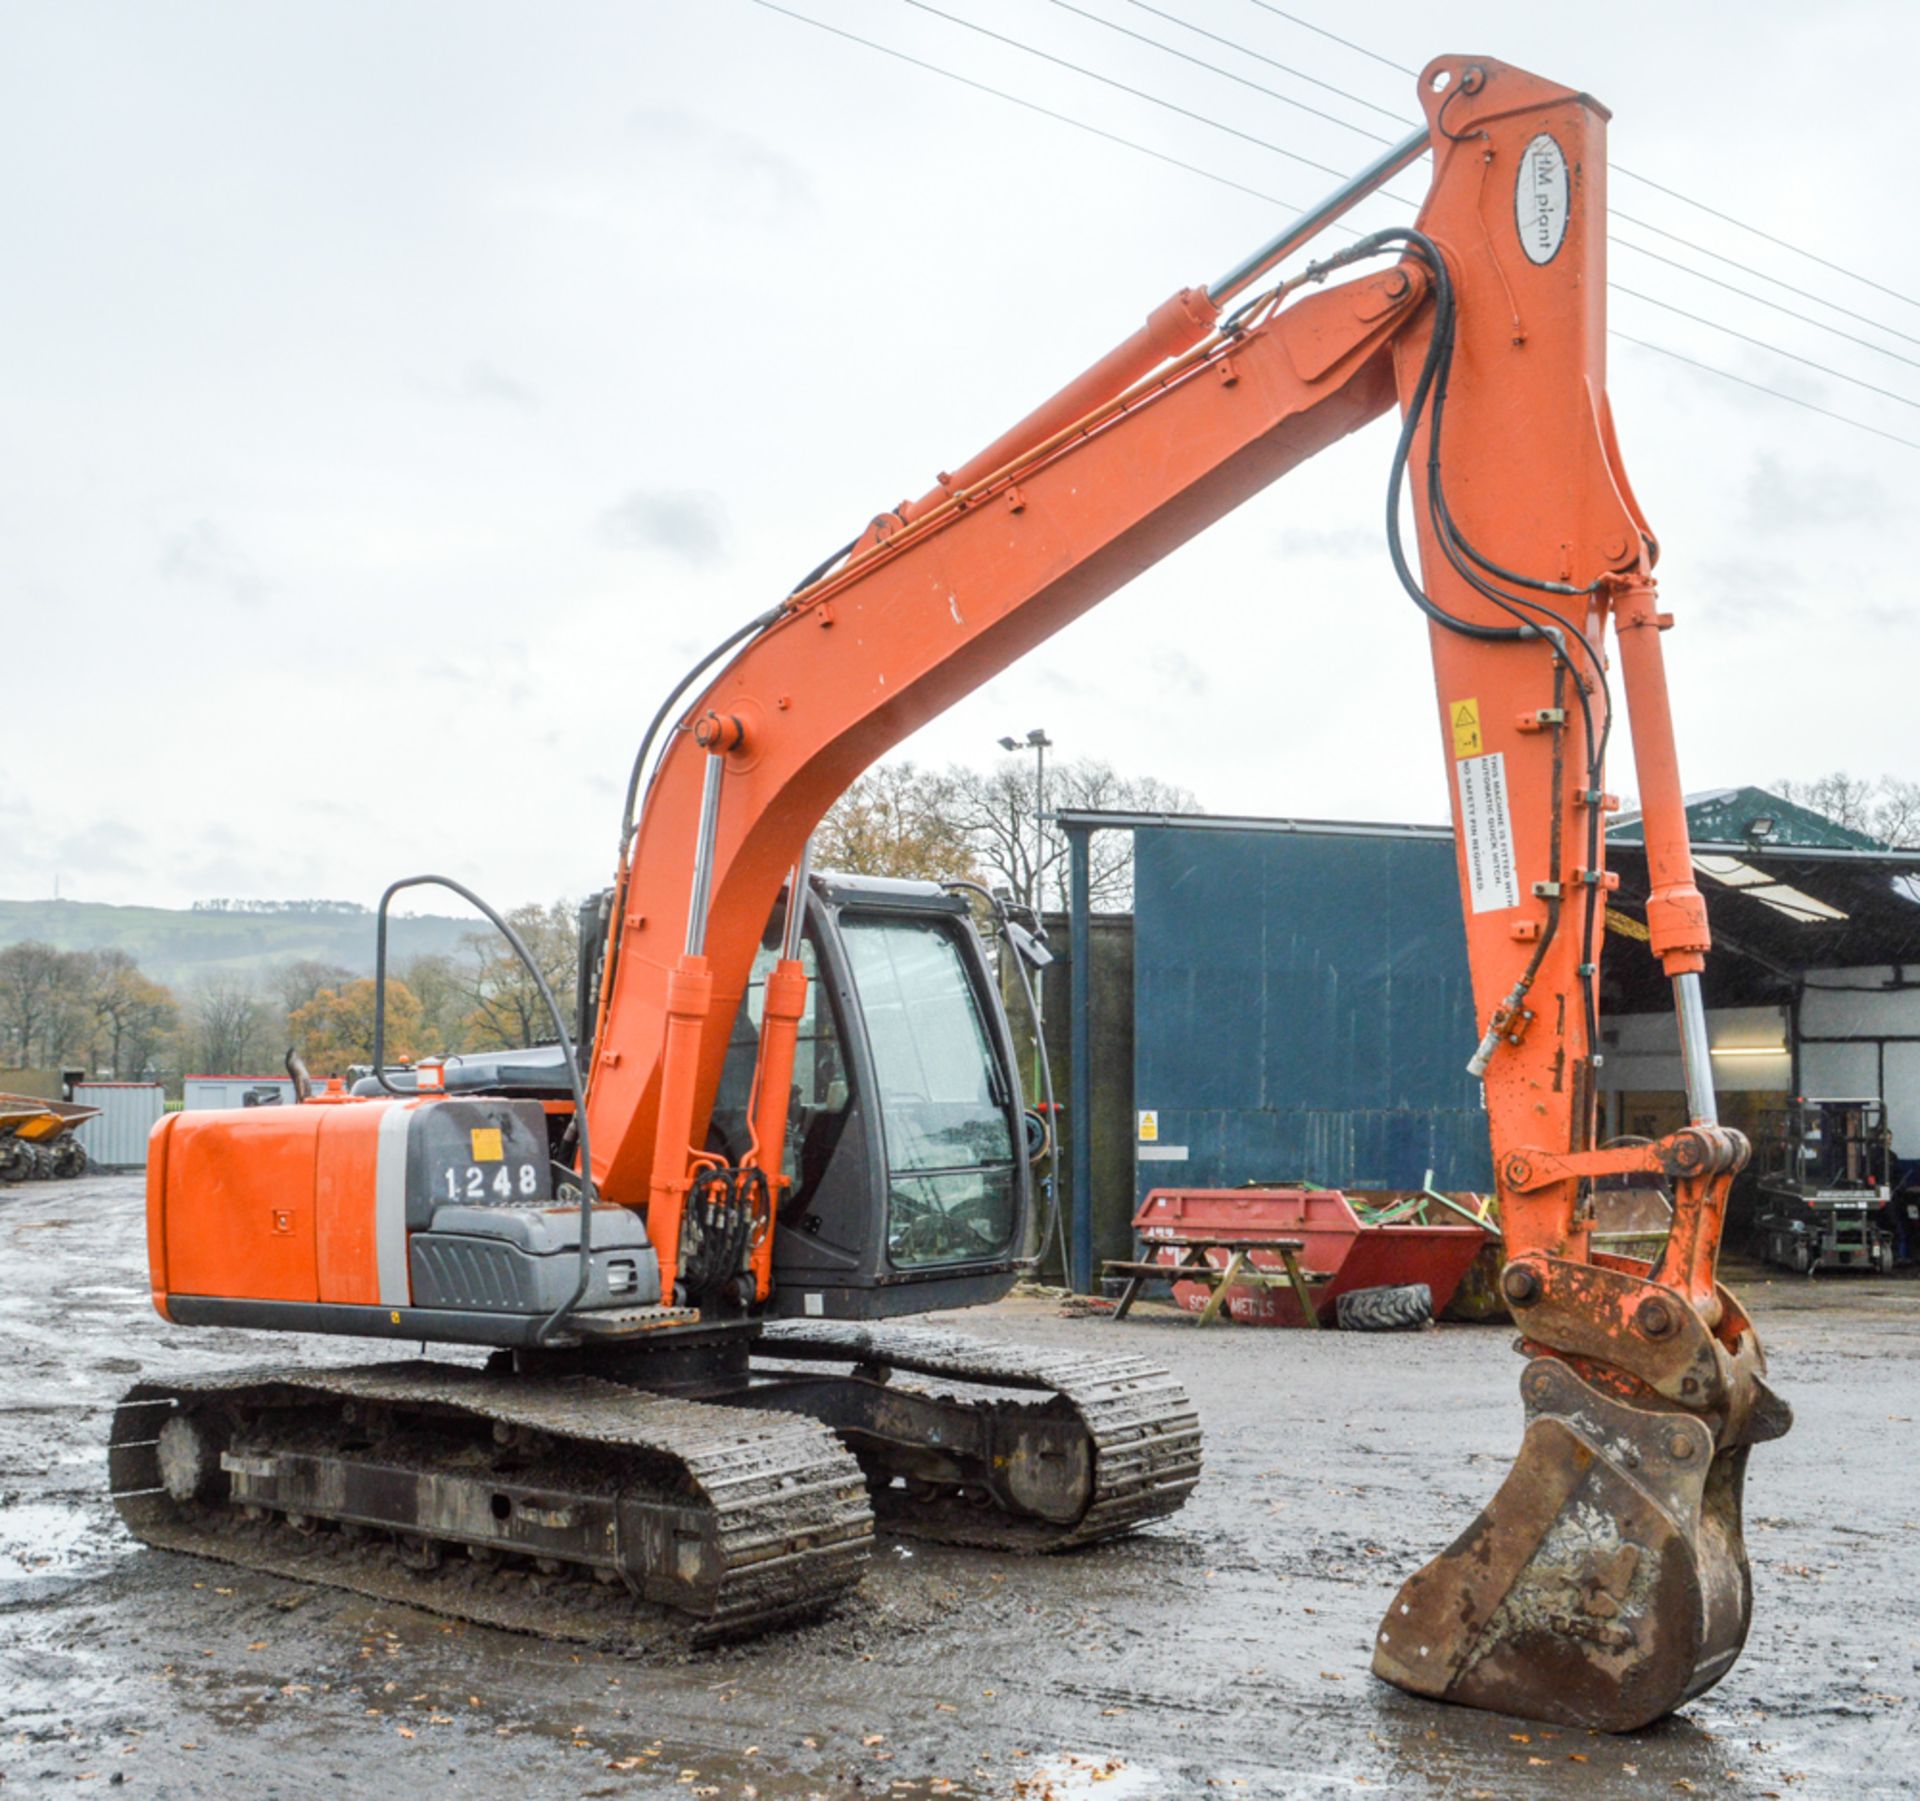 Hitachi Zaxis 130 LCN 13 tonne steel tracked excavator Year: 2010 S/N: 83263 Recorded Hours: 8982 - Image 4 of 12